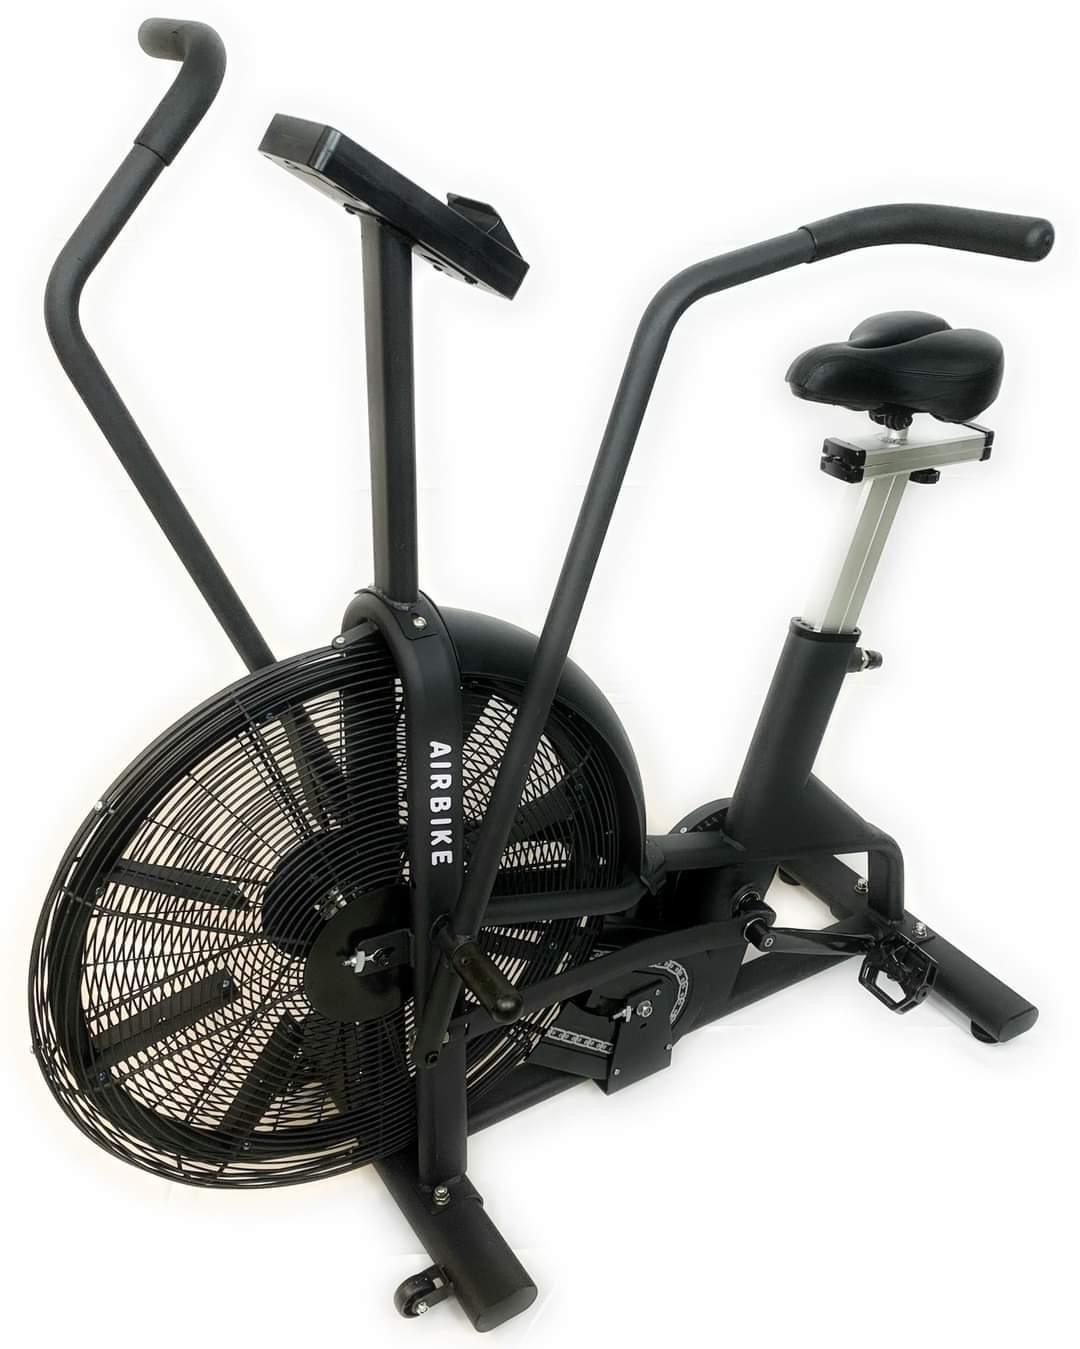 AirBike R900 - A&Psport